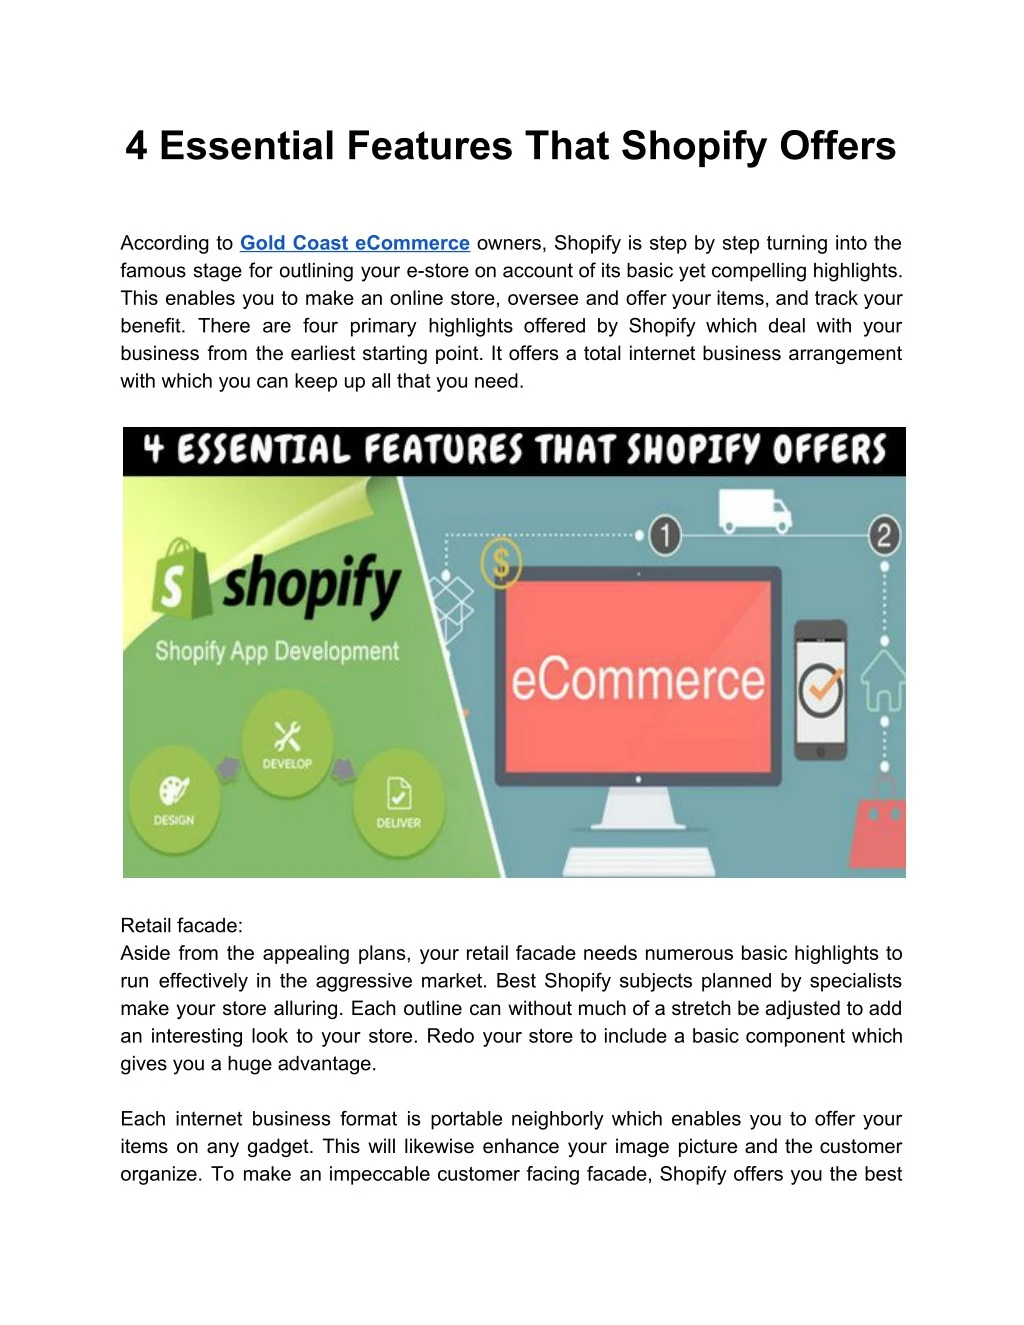 4 essential features that shopify offers